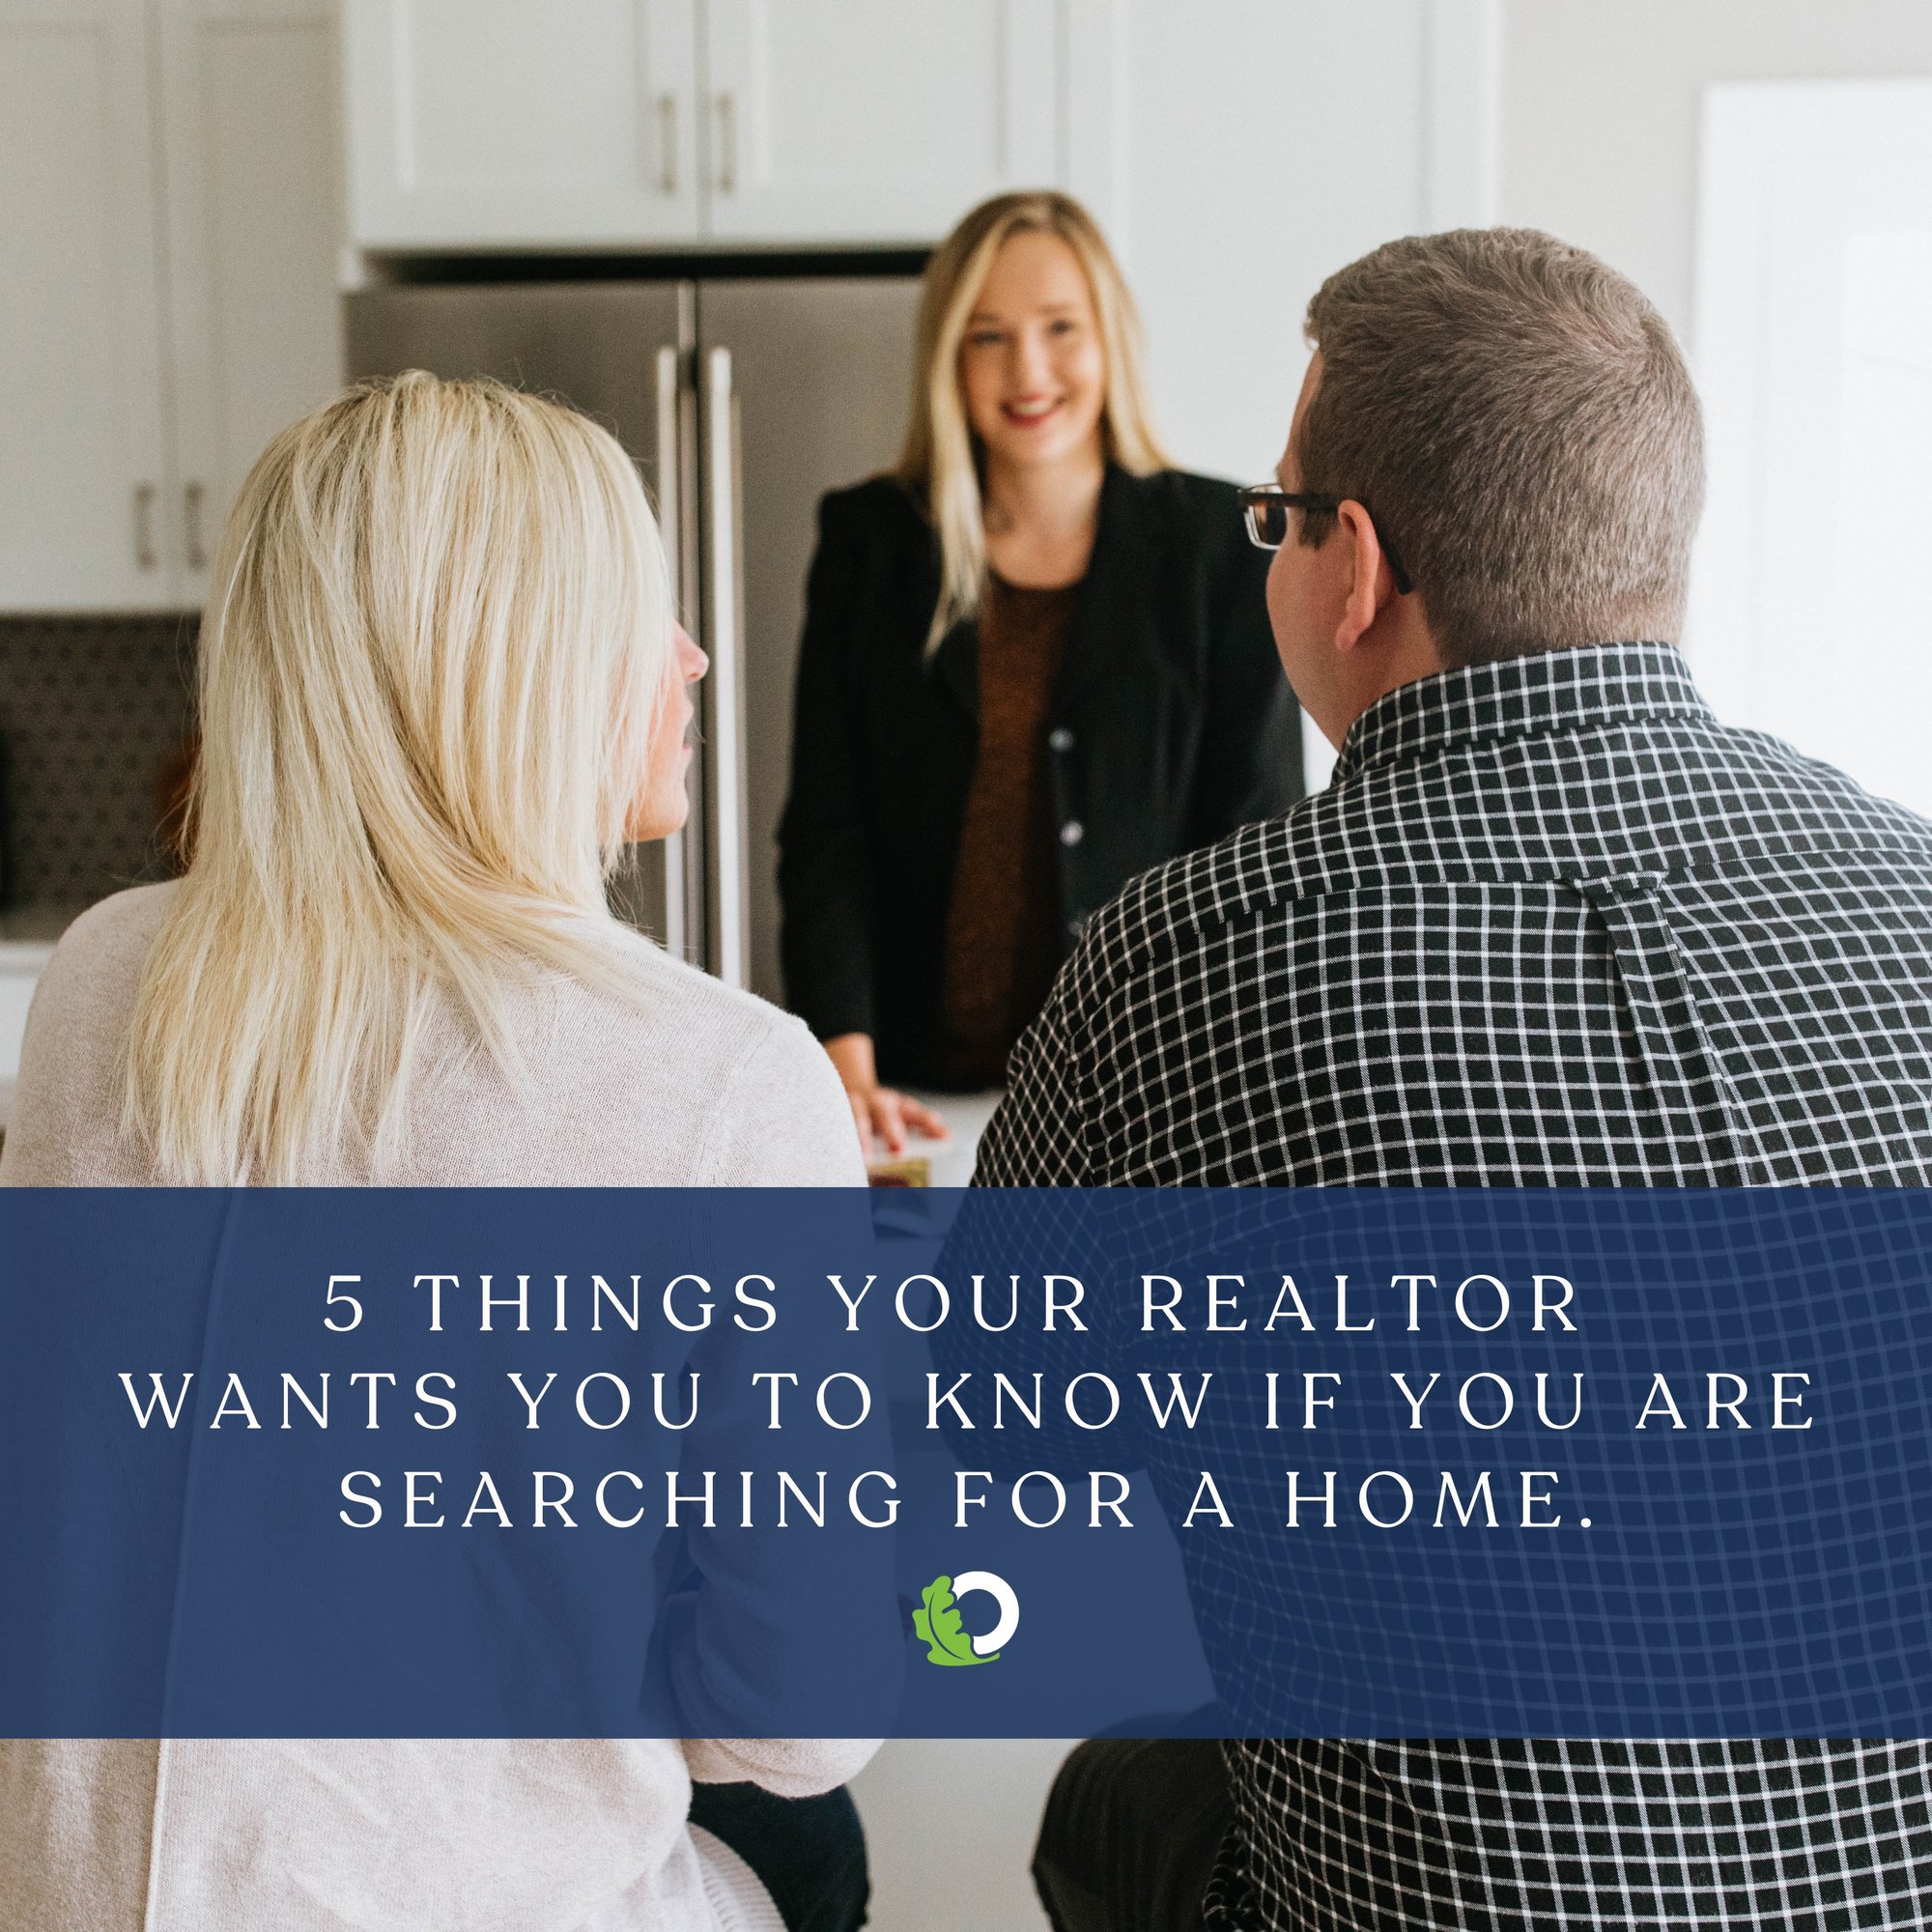 5 Things Your Realtor Wants You to Know if You are Searching for a Home